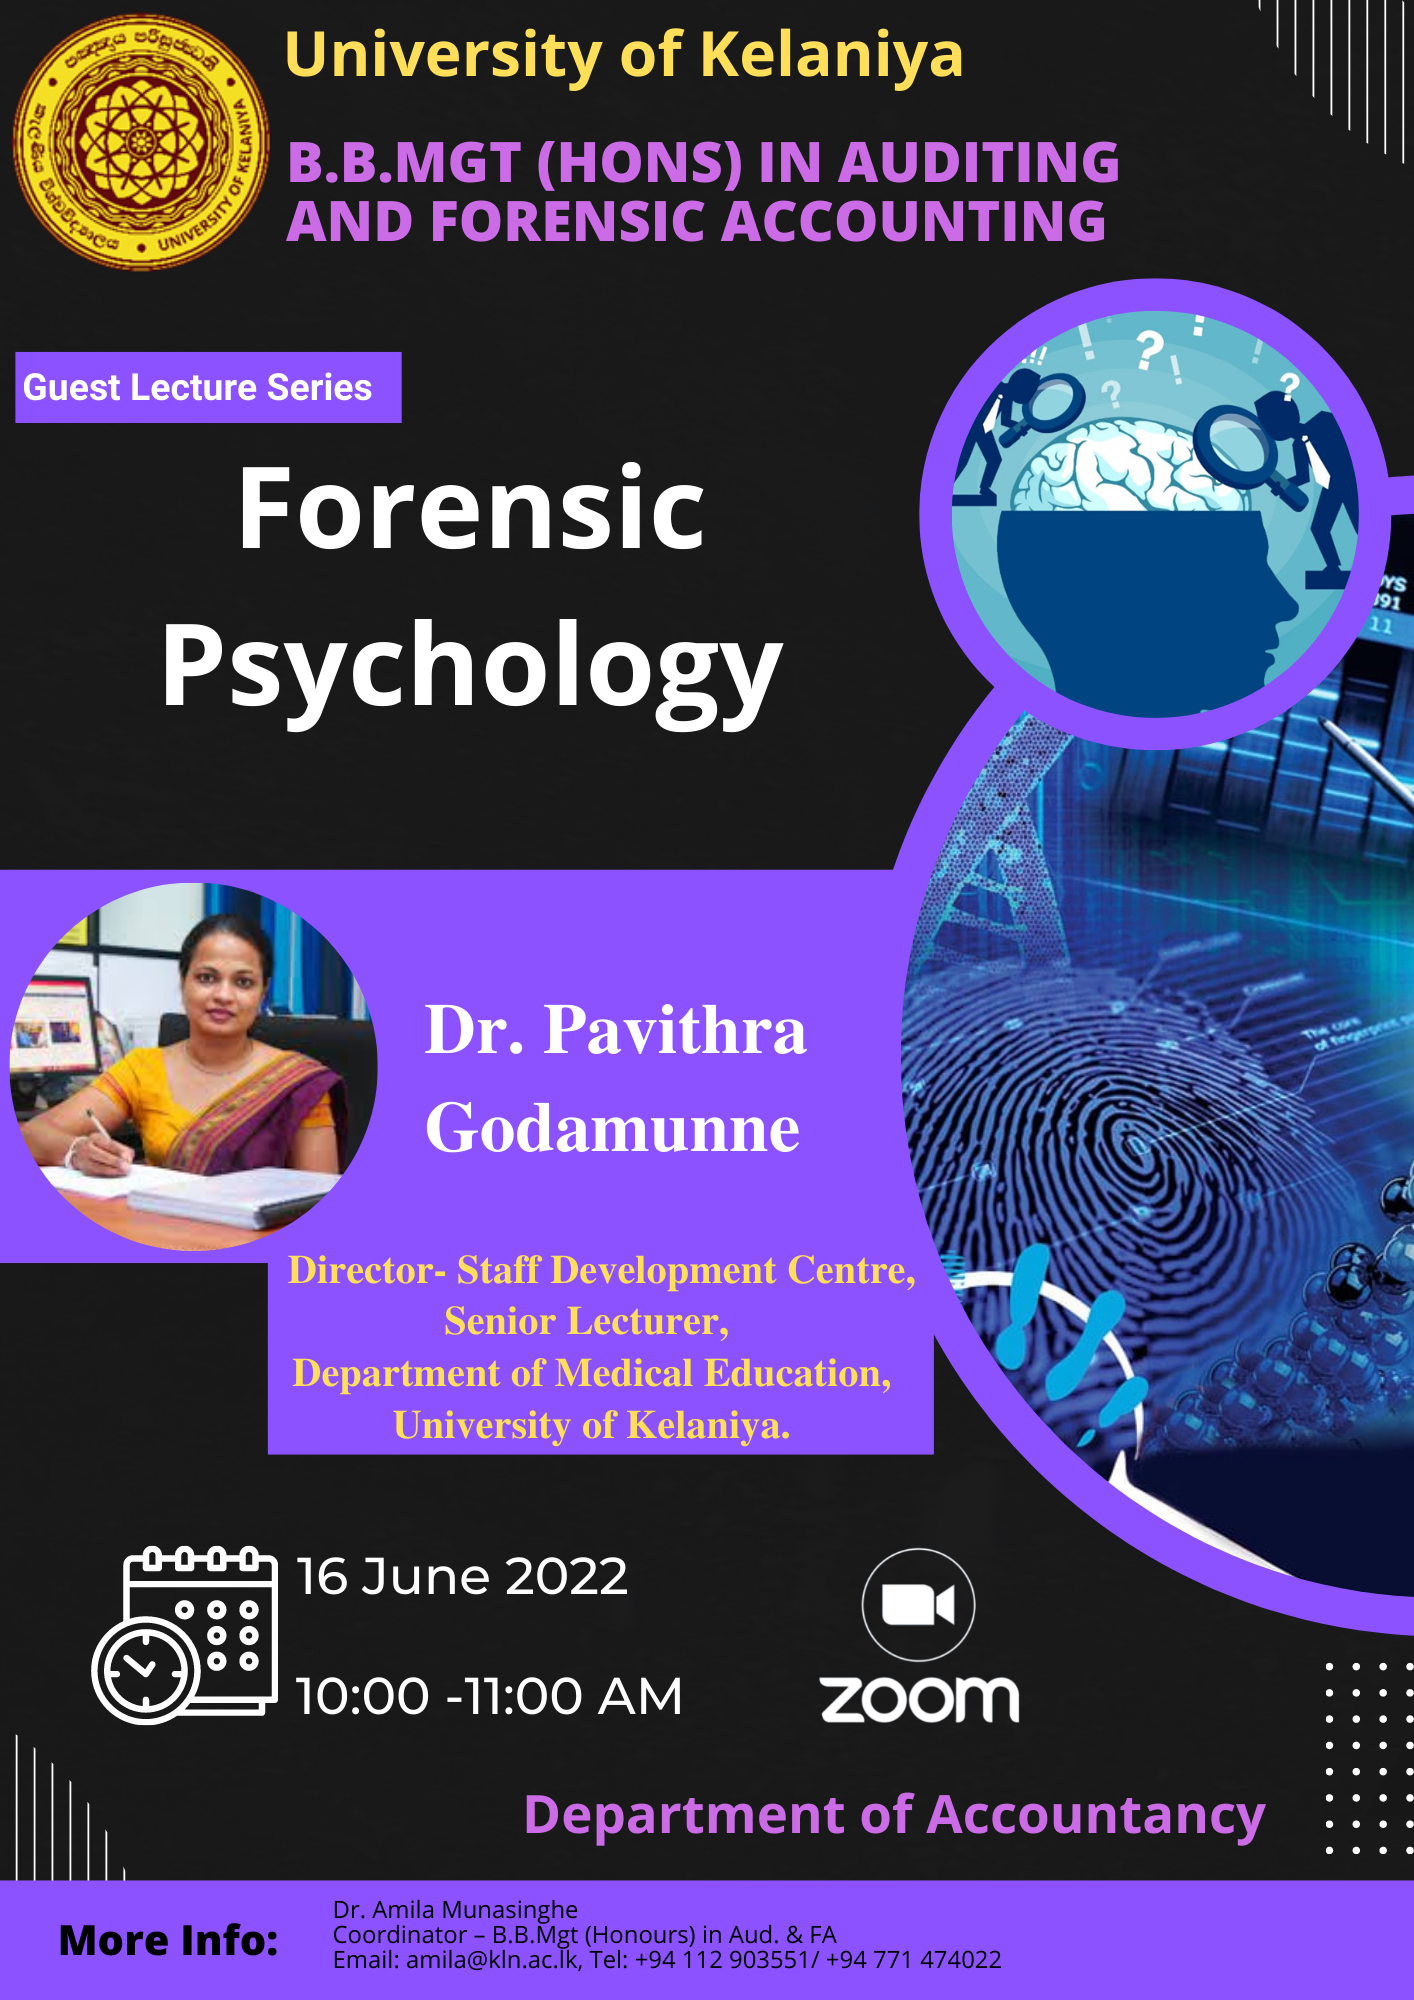 Guest lecture series -  Forensic Psychology